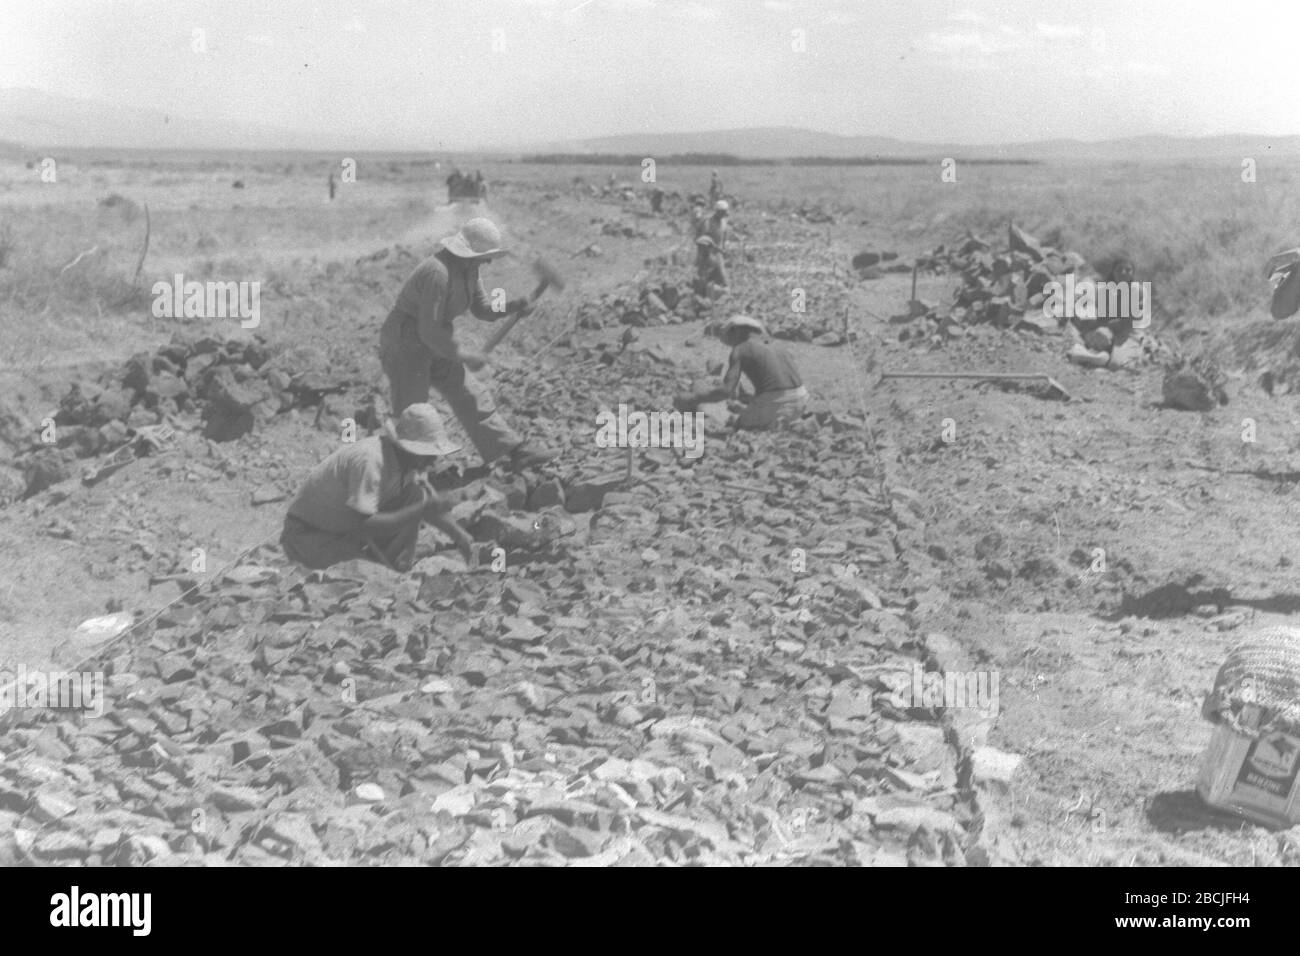 'English: KIBBUTZ MAOZ HAIM MEMBERS LAYING THE FOUNDATION OF A ROAD BETWEEN MAOZ HAIM & MOSHAV BEIT YOSSEF IN THE BEIT SHEAN VALLEY. ◊ó◊ú◊ï◊¶◊ô◊ù, ◊ó◊ë◊®◊ô ◊ß◊ô◊ë◊ï◊• ◊û◊¢◊ï◊ñ ◊ó◊ô◊ô◊ù, ◊°◊ï◊ú◊ú◊ô◊ù ◊õ◊ë◊ô◊© ◊ë◊ô◊ü ◊û◊¢◊ï◊ñ ◊ó◊ô◊ô◊ù ◊ú◊ë◊ô◊ü ◊û◊ï◊©◊ë ◊ë◊ô◊™ ◊ô◊ï◊°◊£ ◊ë◊¢◊û◊ß ◊ë◊ô◊™ ◊©◊ê◊ü.; 13 June 1939; This is available from National Photo Collection of Israel, Photography dept. Goverment Press Office (link), under the digital ID D13-076.This tag does not indicate the copyright status of the attached work. A normal copyright tag is still required. See Commons:Licensing for more information. Stock Photo